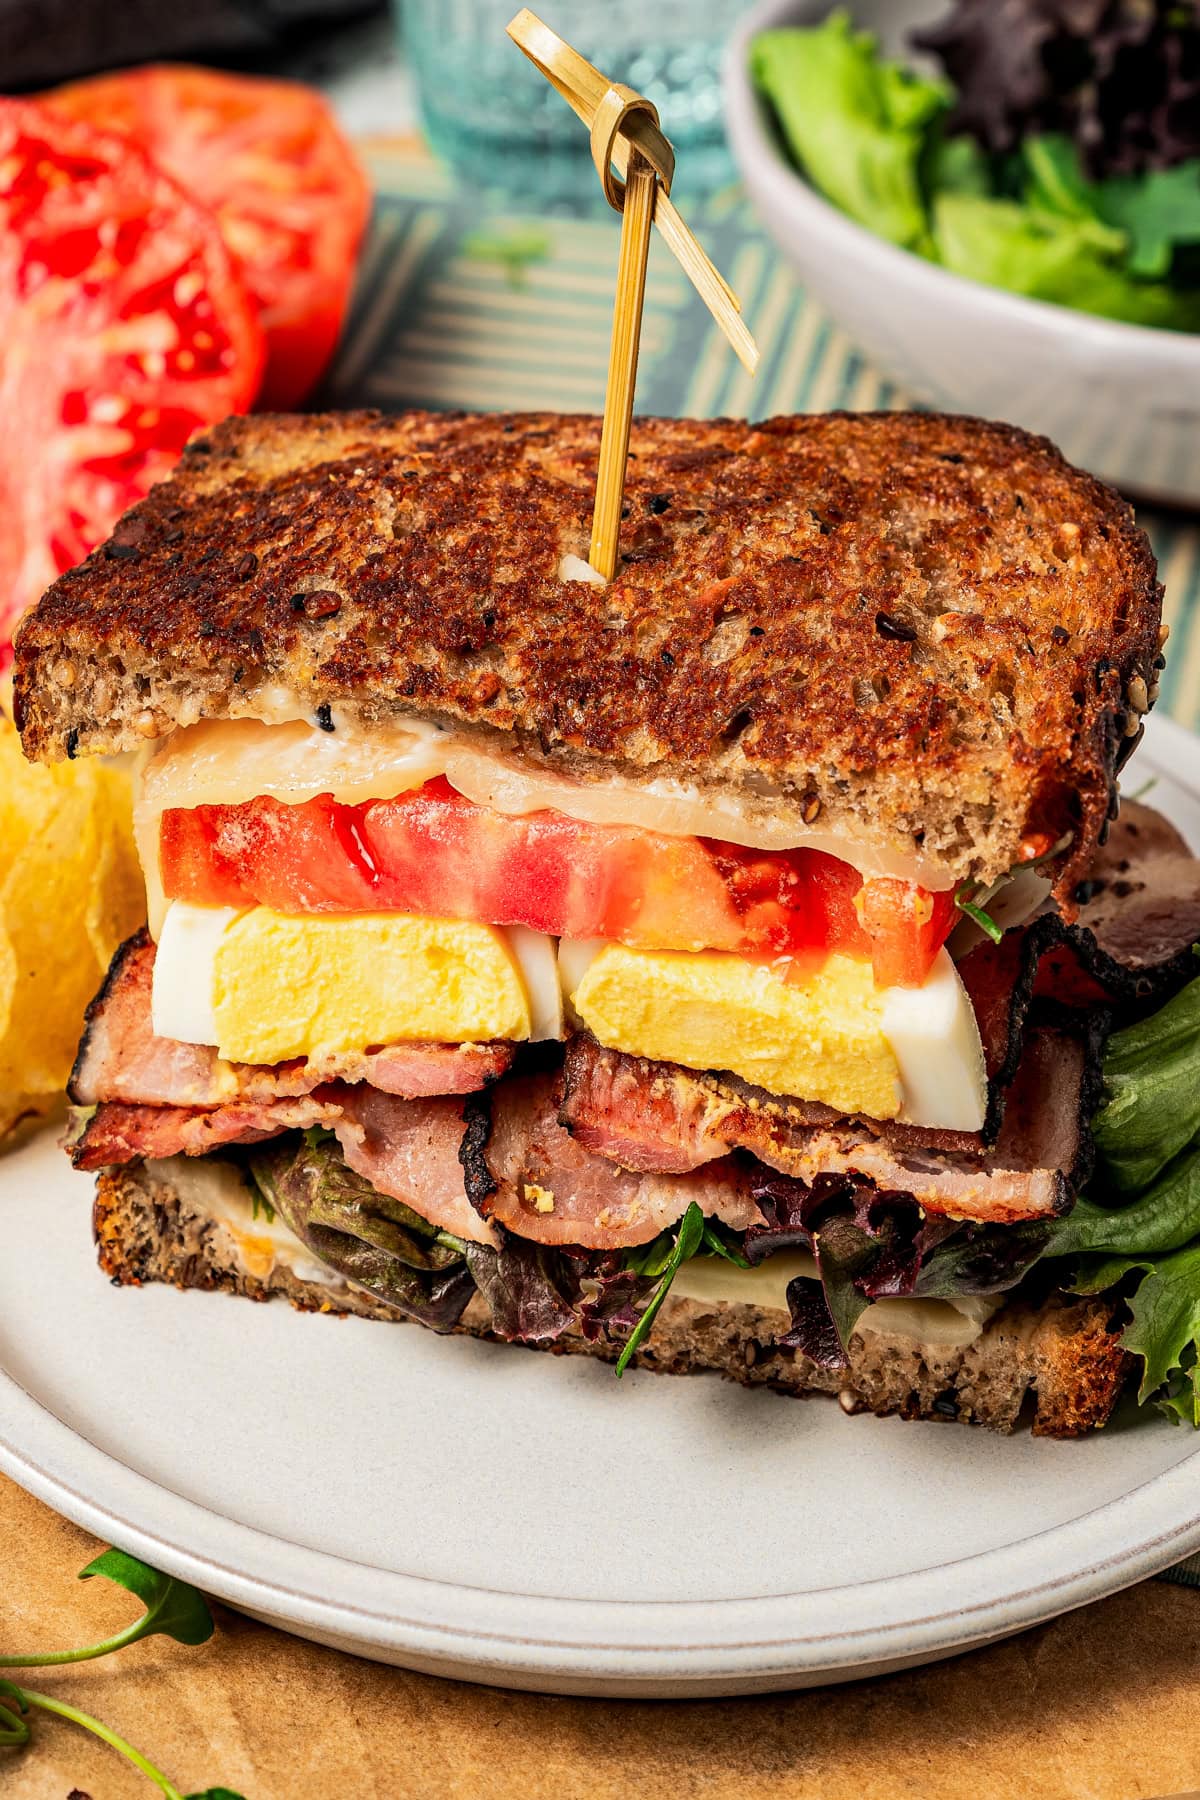 Sandwich with eggs, tomatoes, bacon, and cheese.